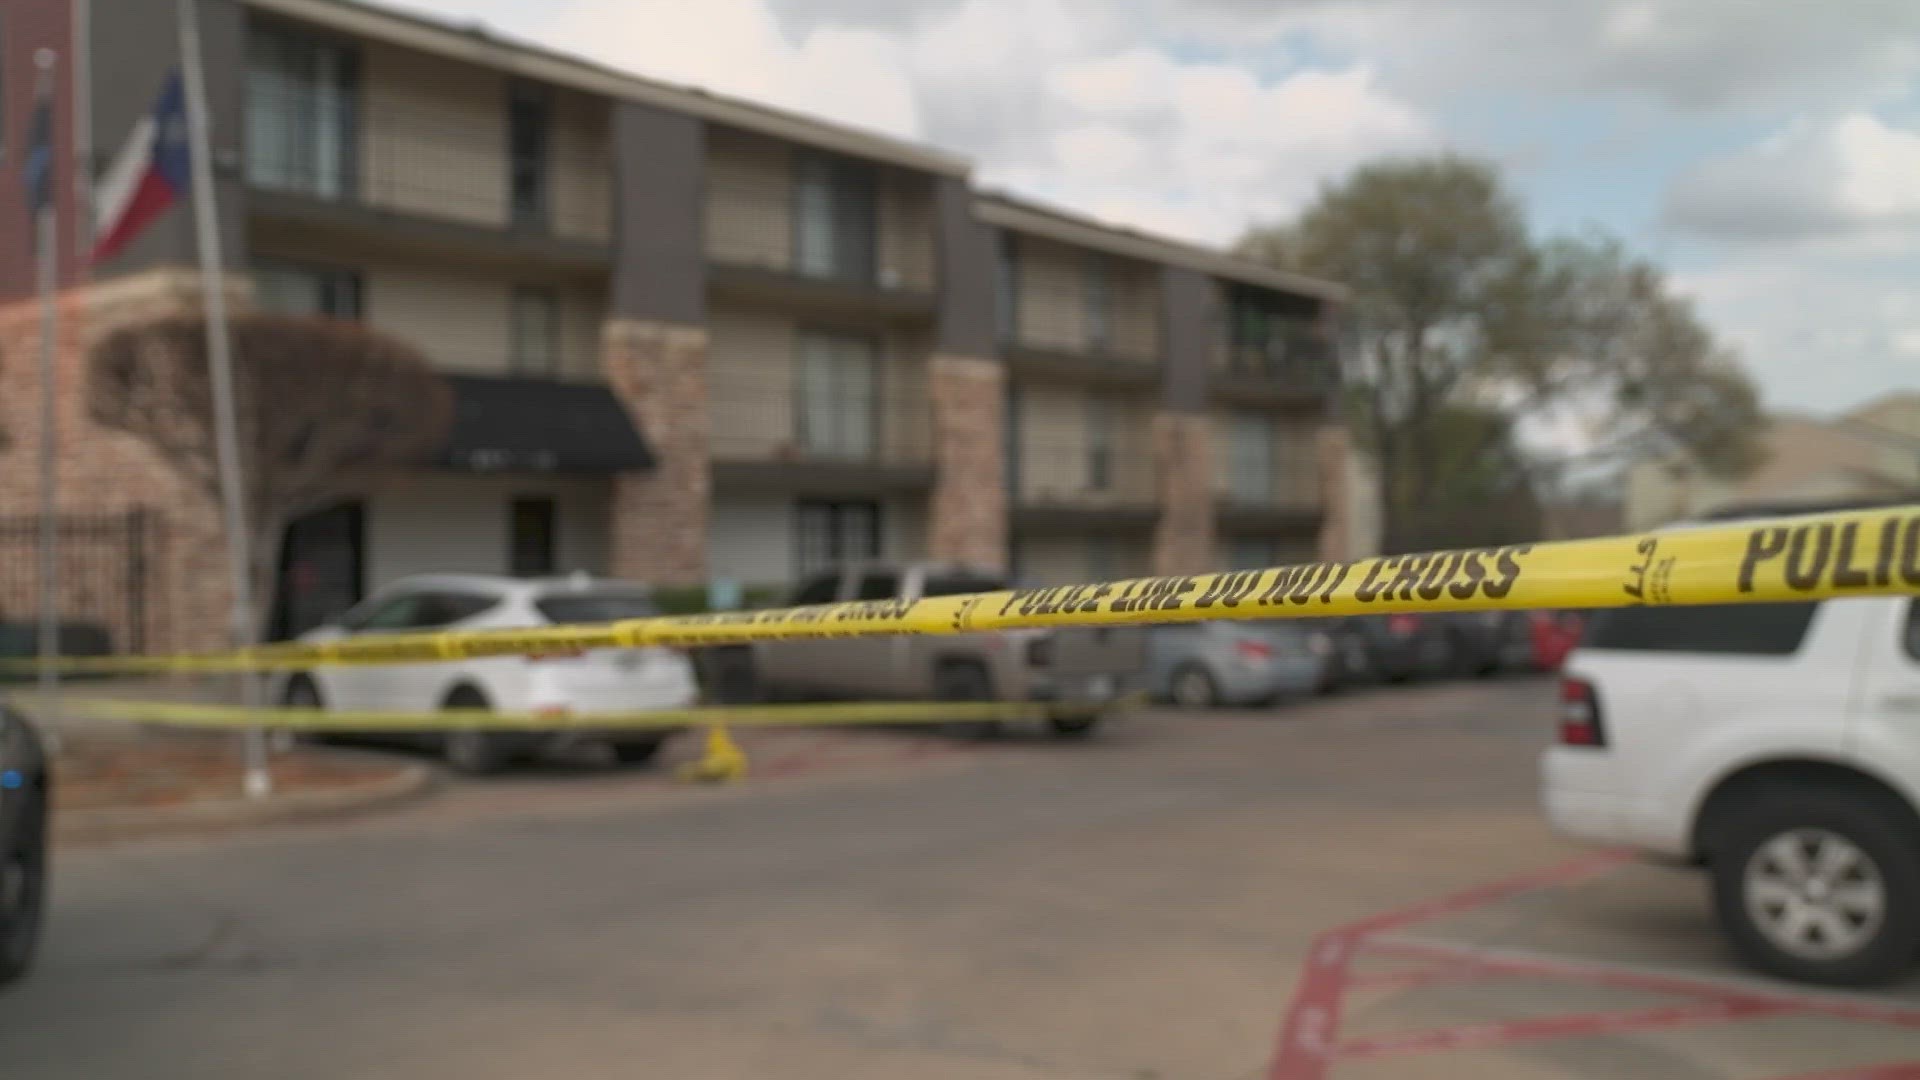 Police sources say the incident stemmed from an argument at the apartment complex.